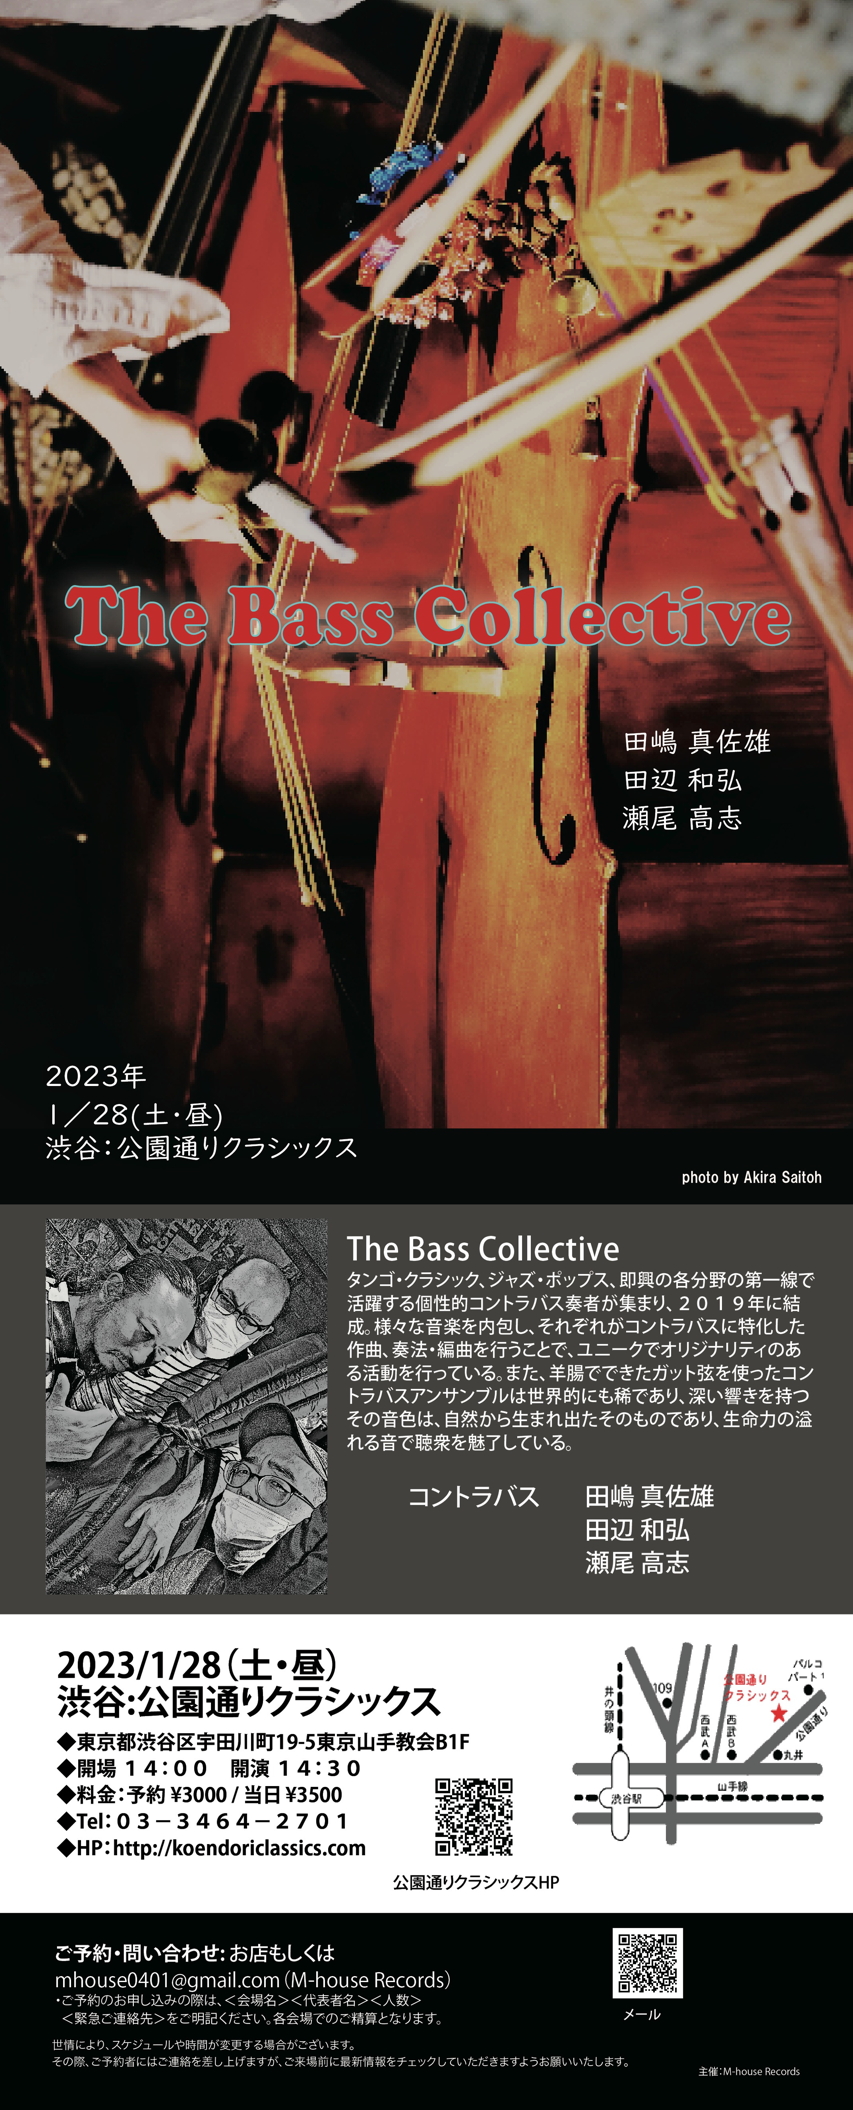 "The Bass Collective”